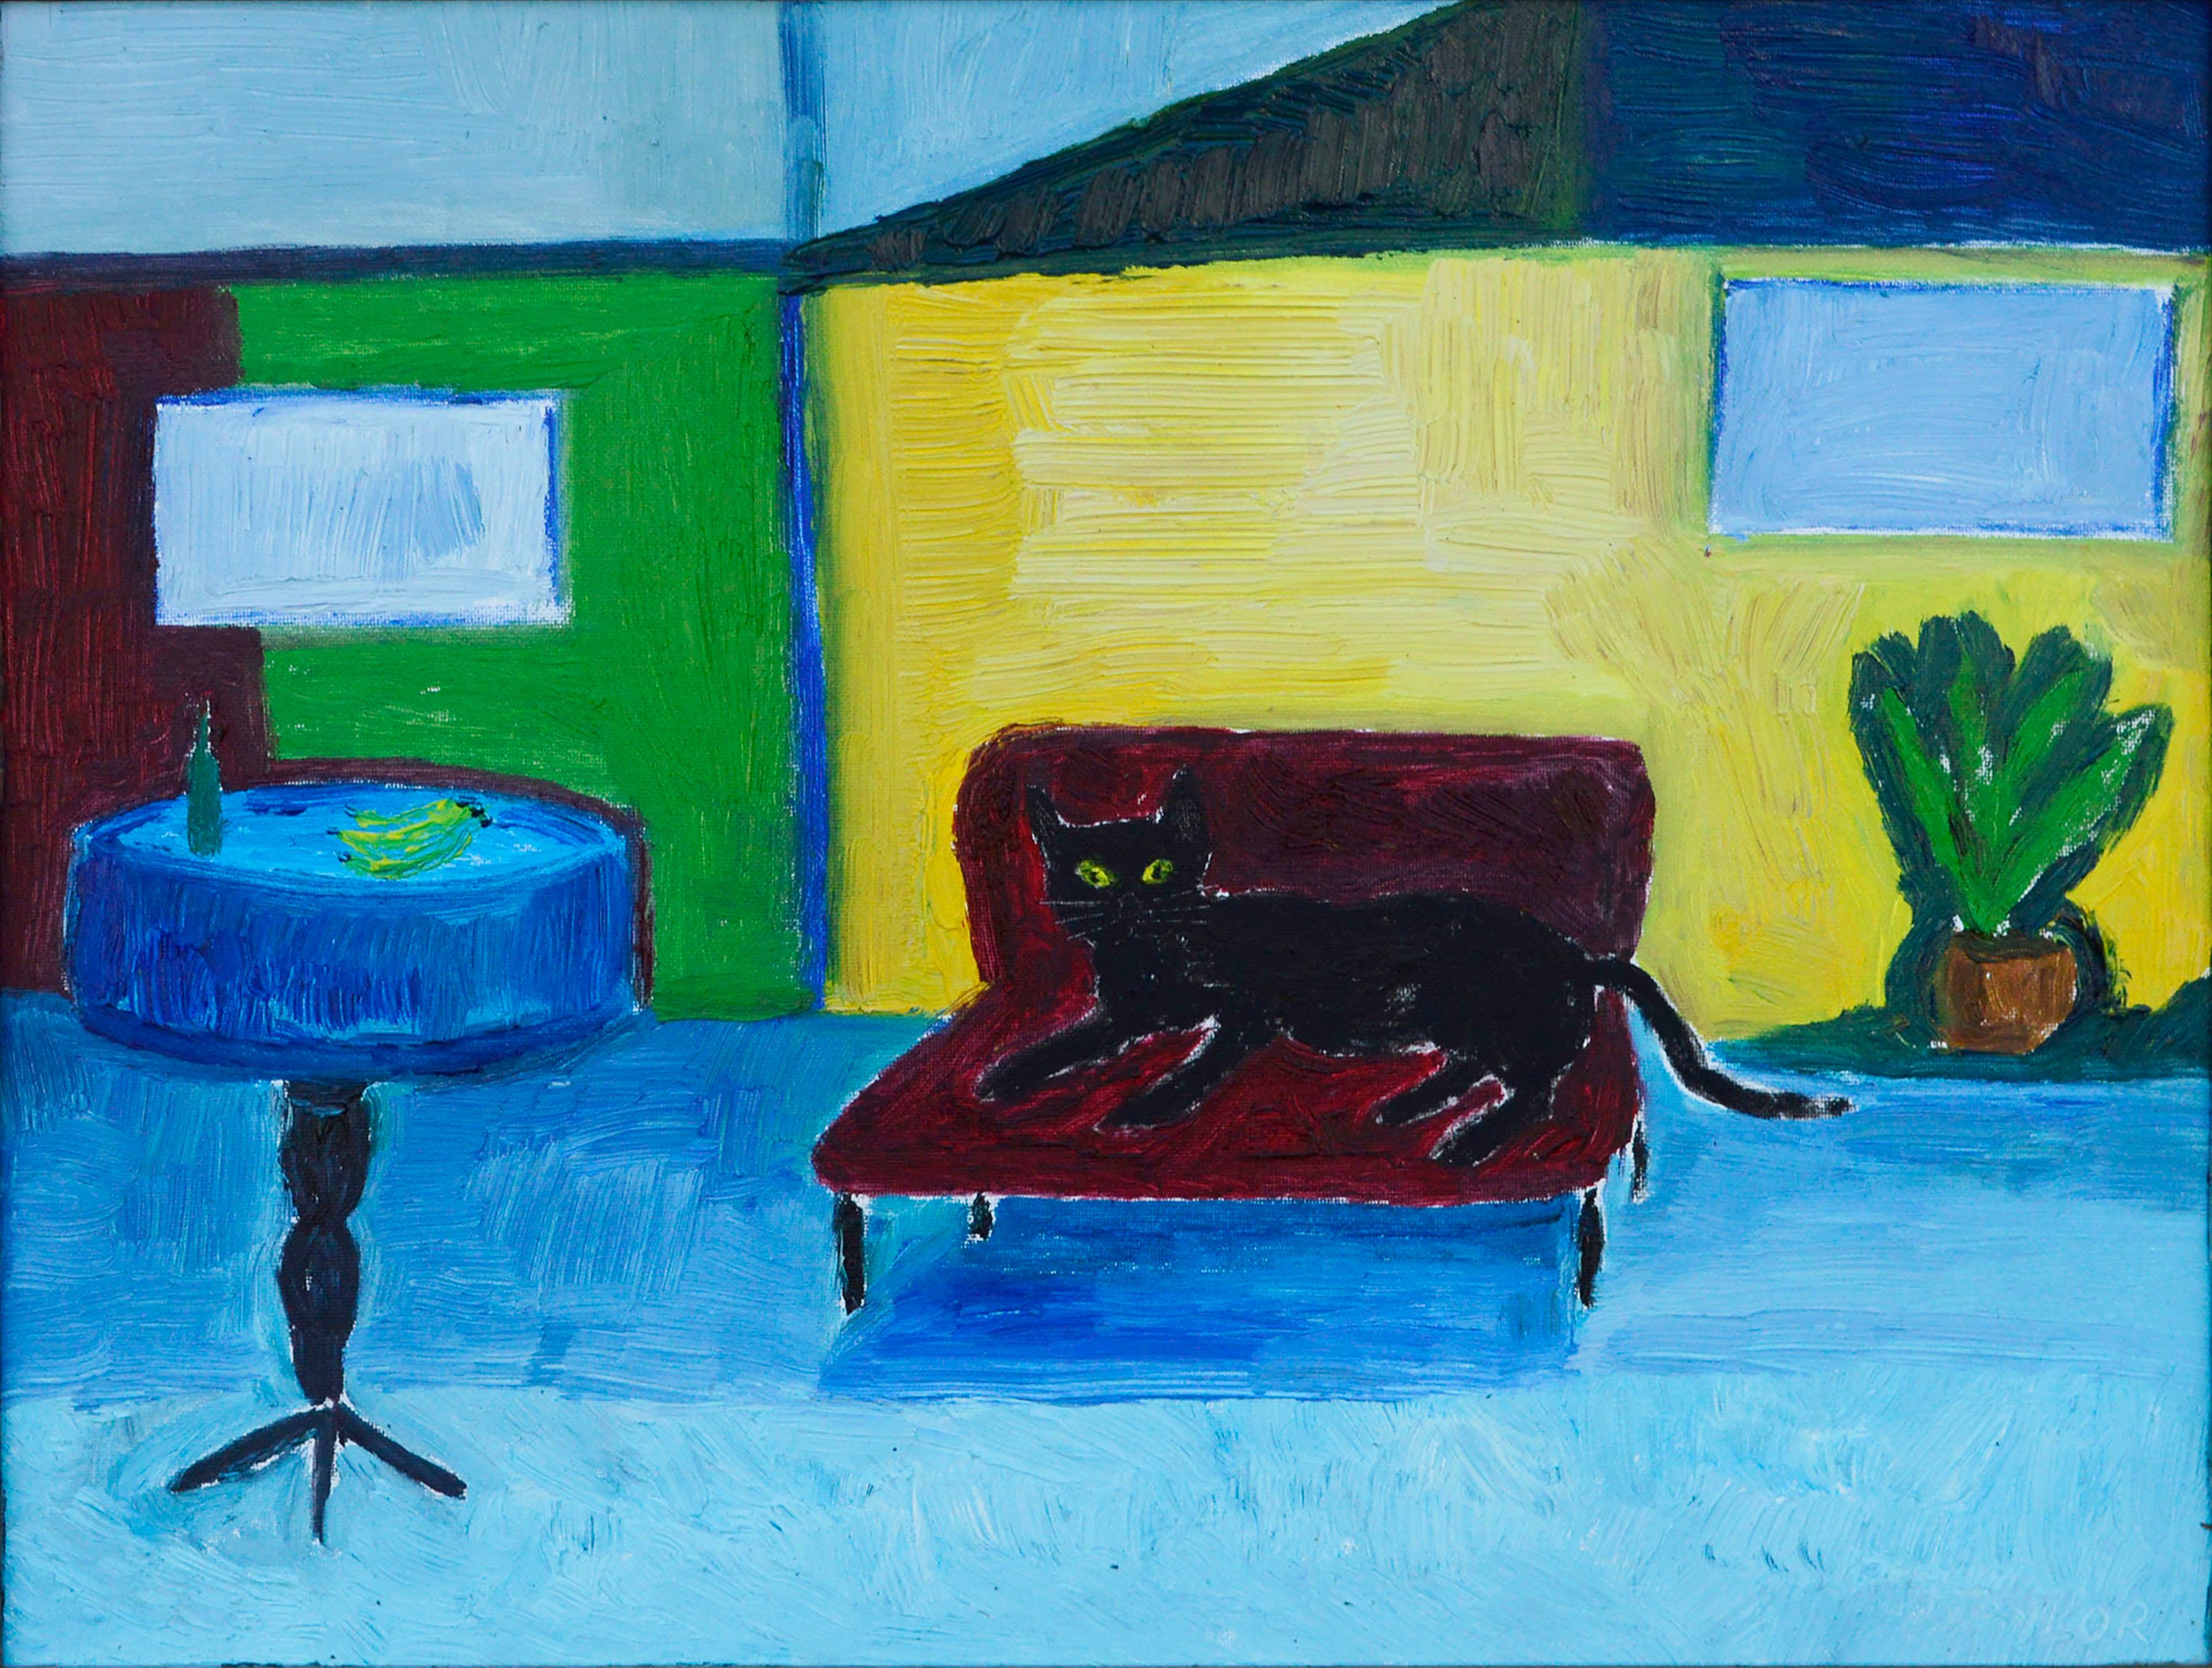 Red Couch, Black Cat - Contemporary Fauvist Interior Scene in Primary Colors - Painting by Jonathan Taylor